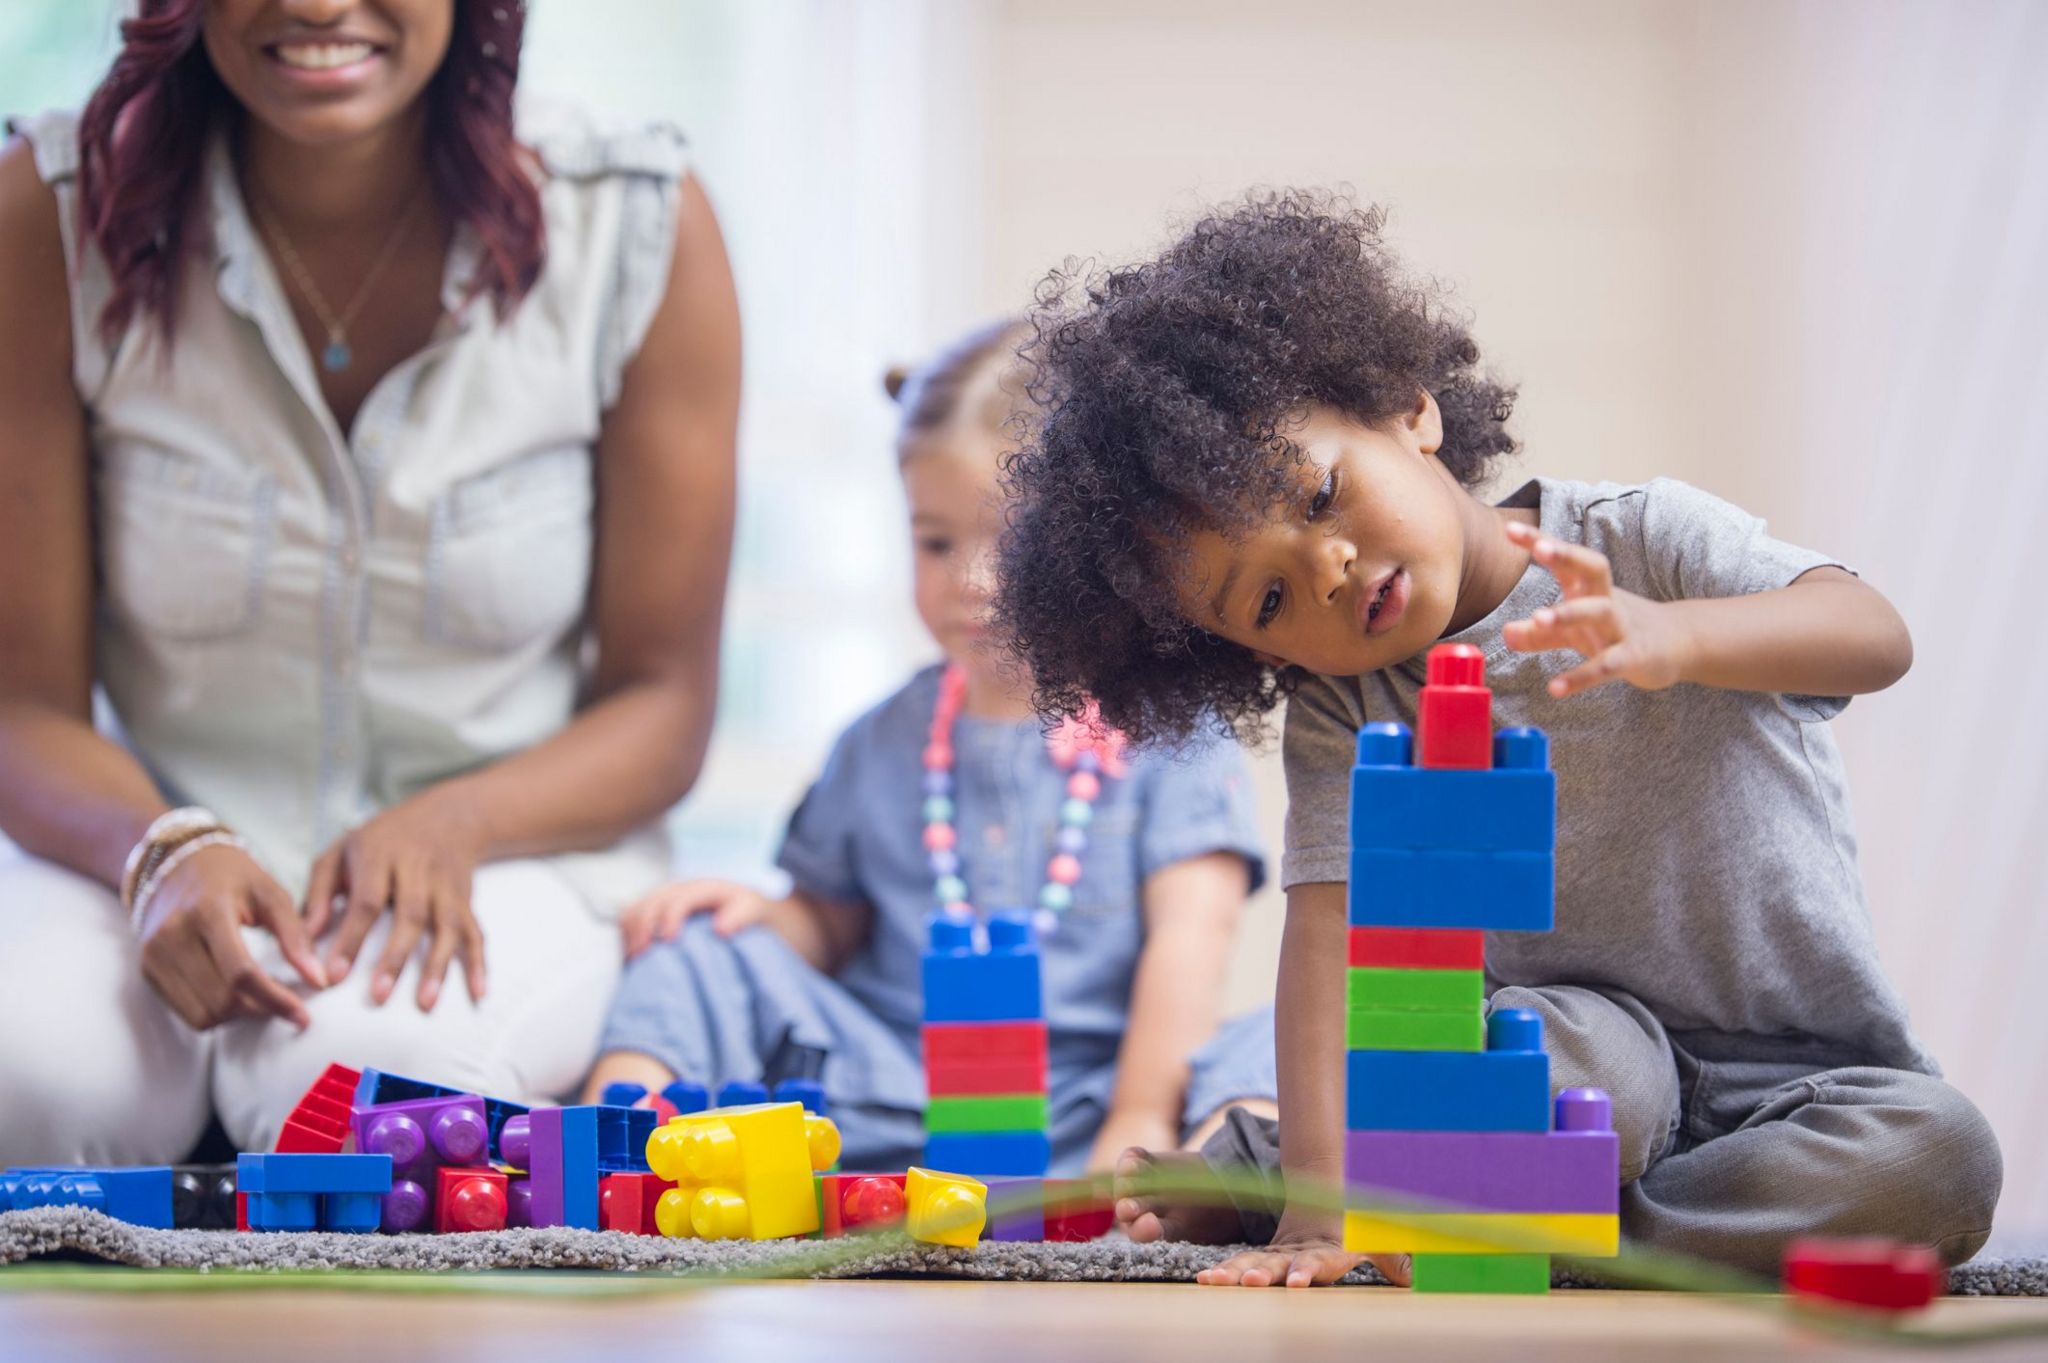 A stock image showing a young boy in the foreground playing with large stackable lego-type bricks. A young girl and a woman can be seen in the background also on the playmat.